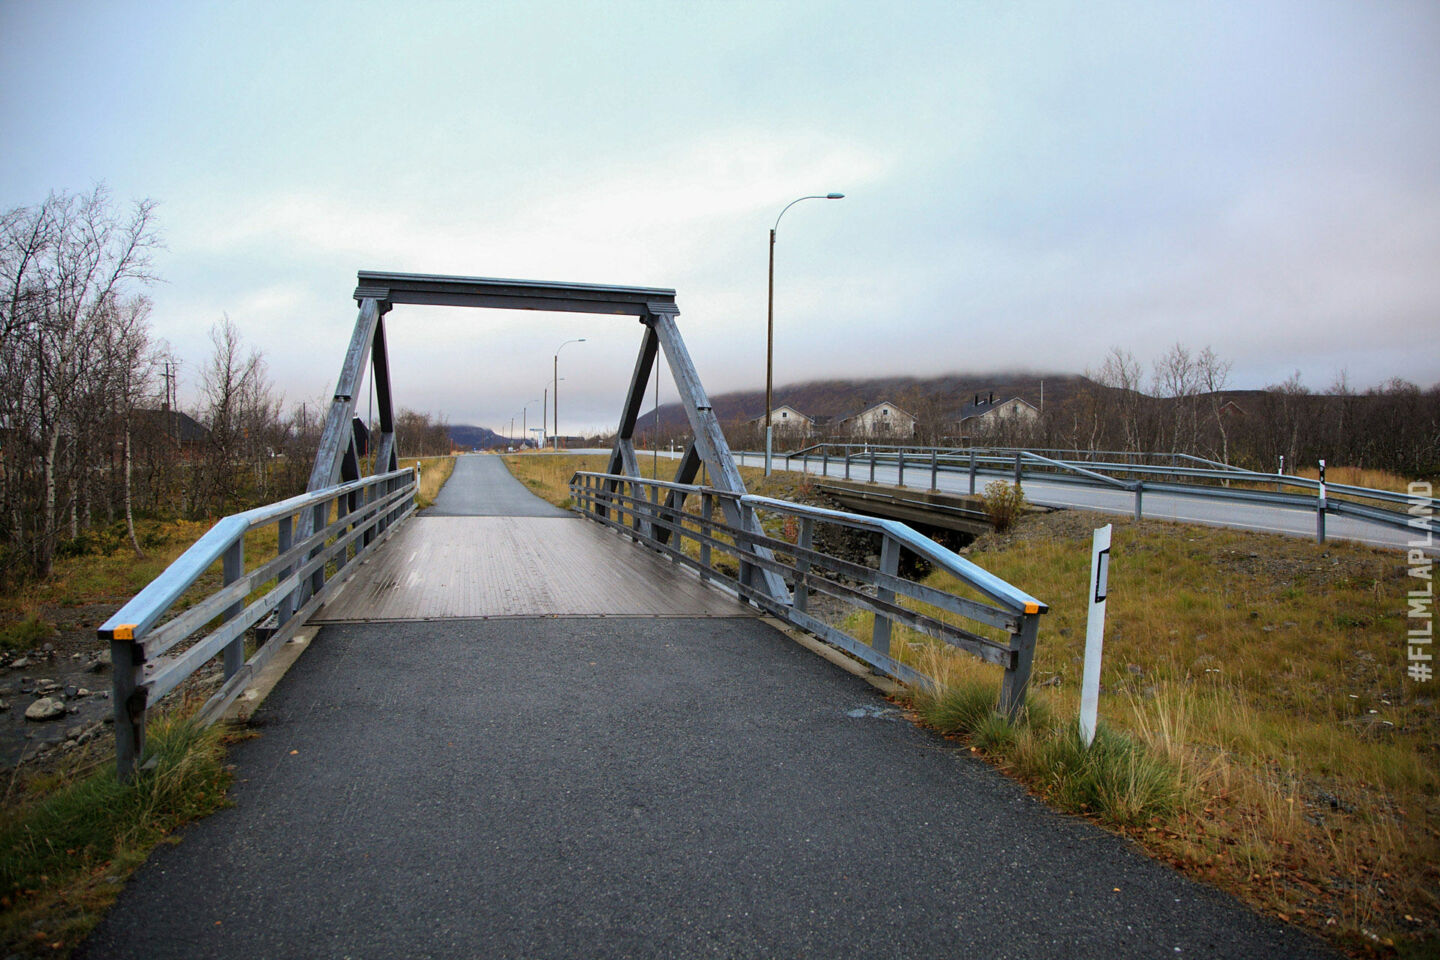 Roads & bridges in Enontekiö, accessible all-winter long, a feature of Finnish Lapland filming locations